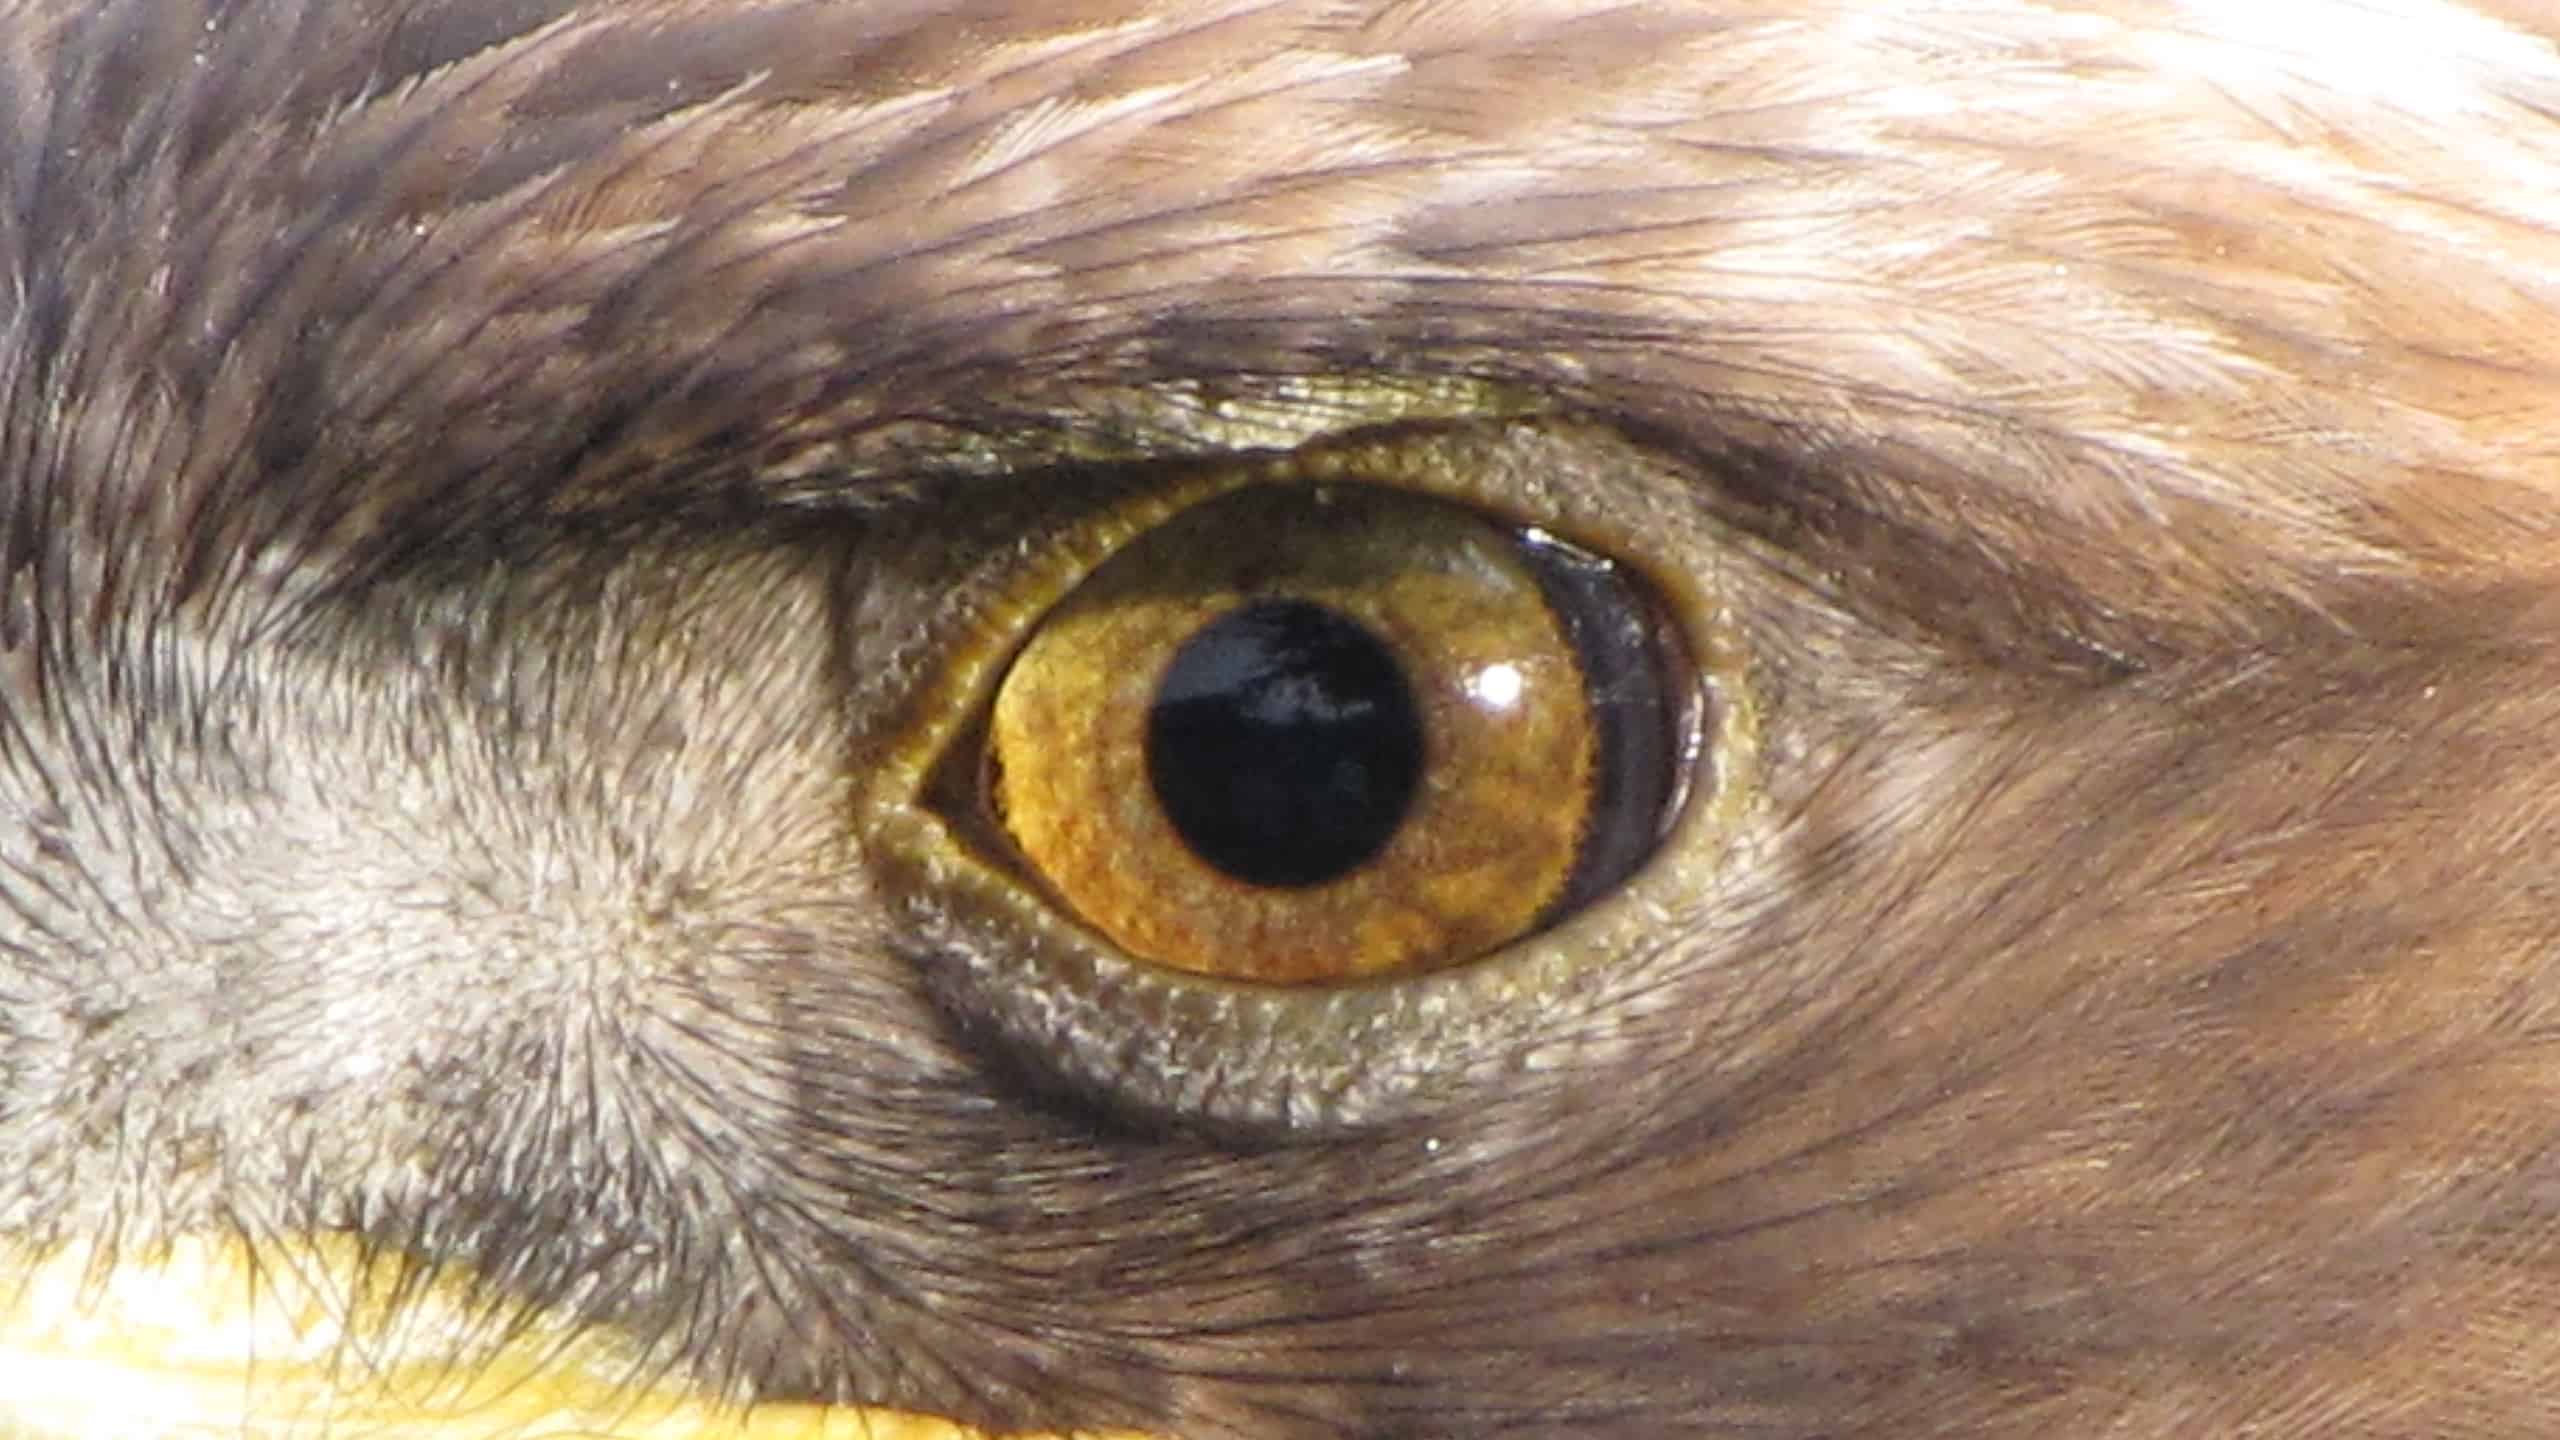 Close-up of a golden eagle's eye.